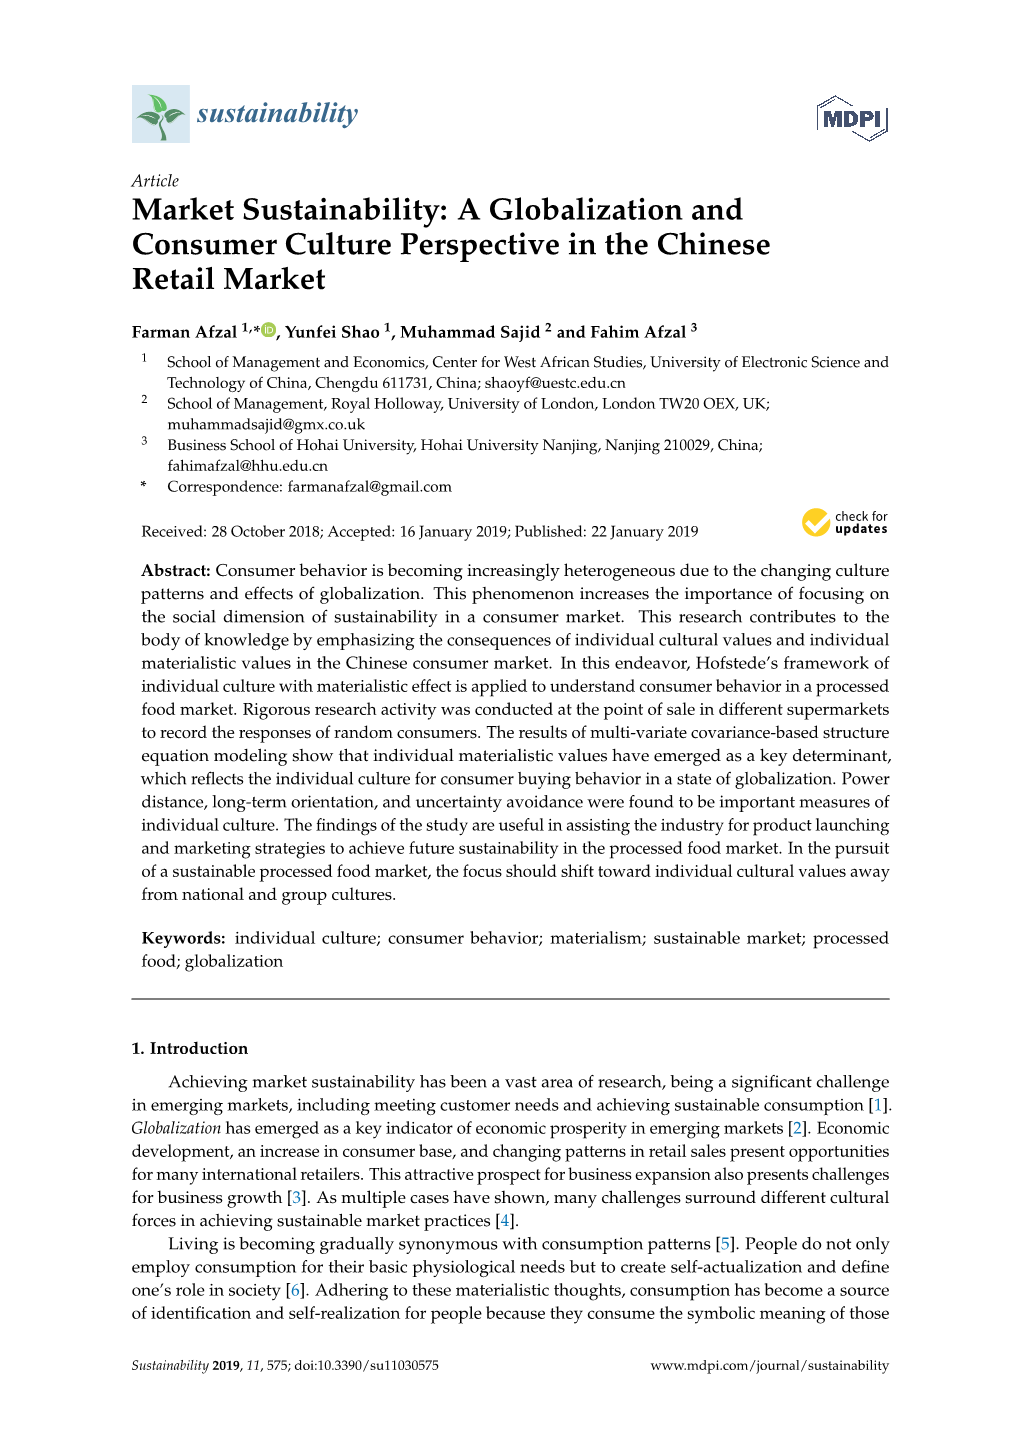 Market Sustainability: a Globalization and Consumer Culture Perspective in the Chinese Retail Market